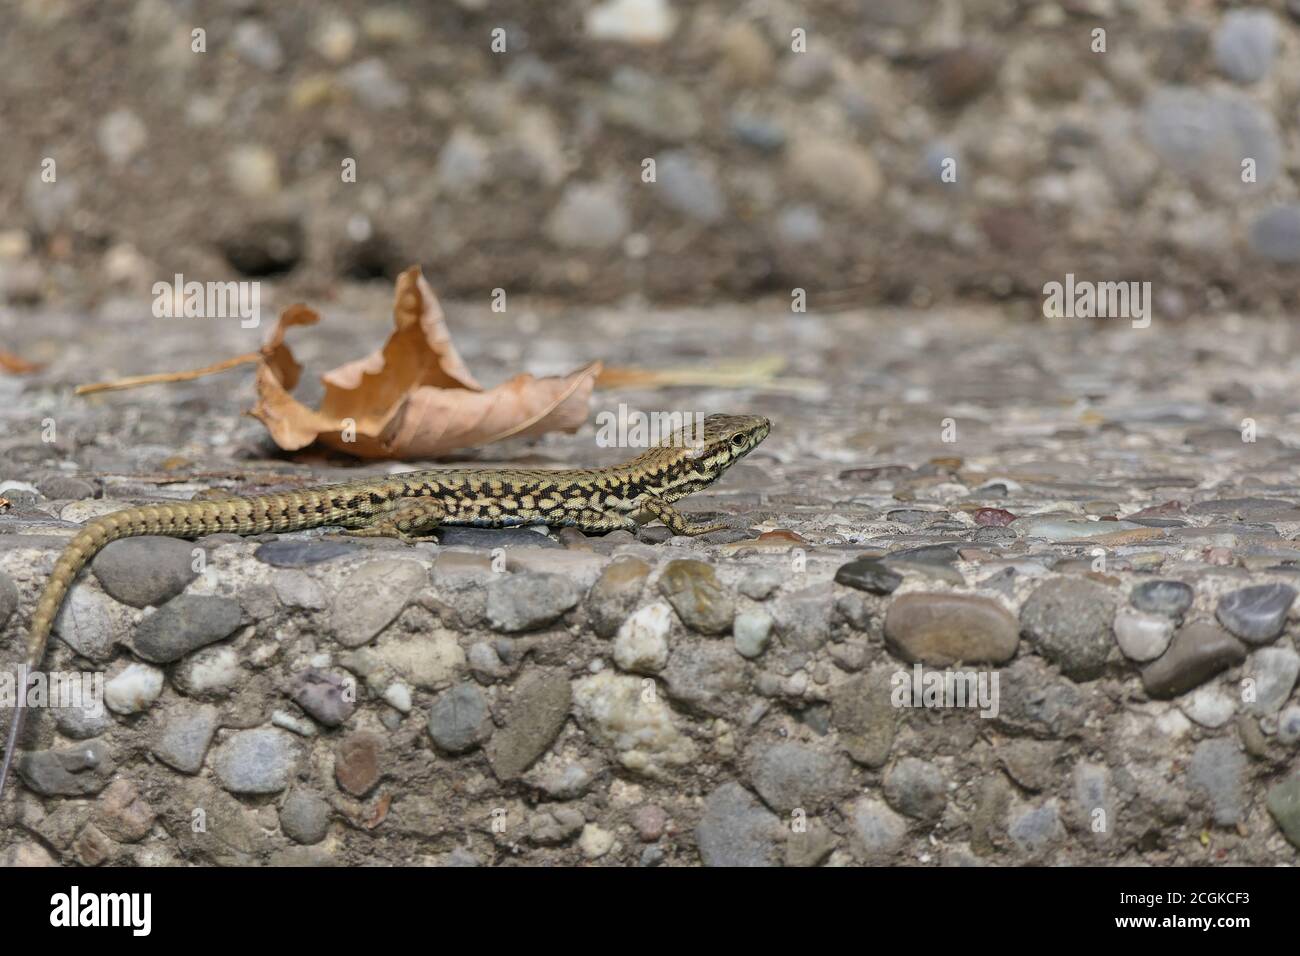 Closeup podarcis muralis or common wall lizard on a stony stair from the side Stock Photo